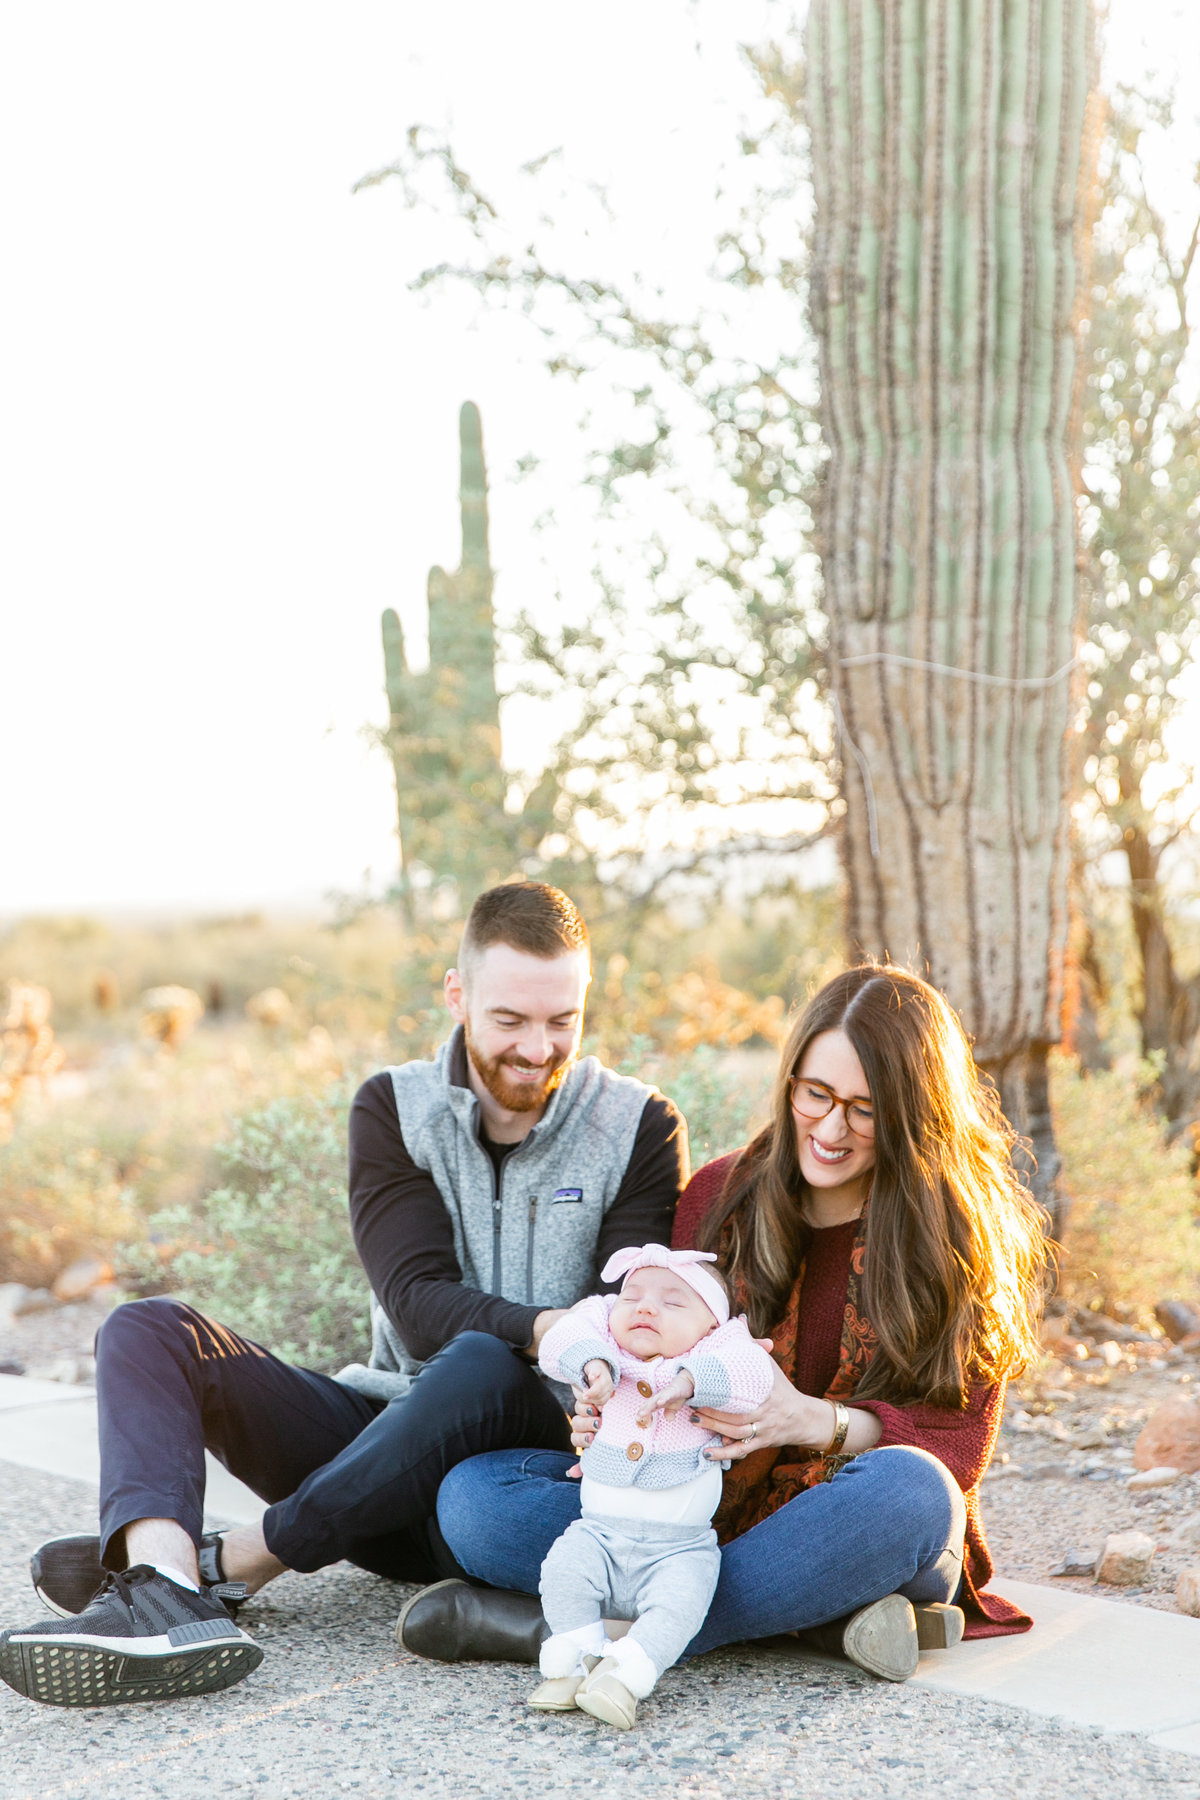 Karlie Colleen Photography - Scottsdale Family Photography - Lauren & Family-142